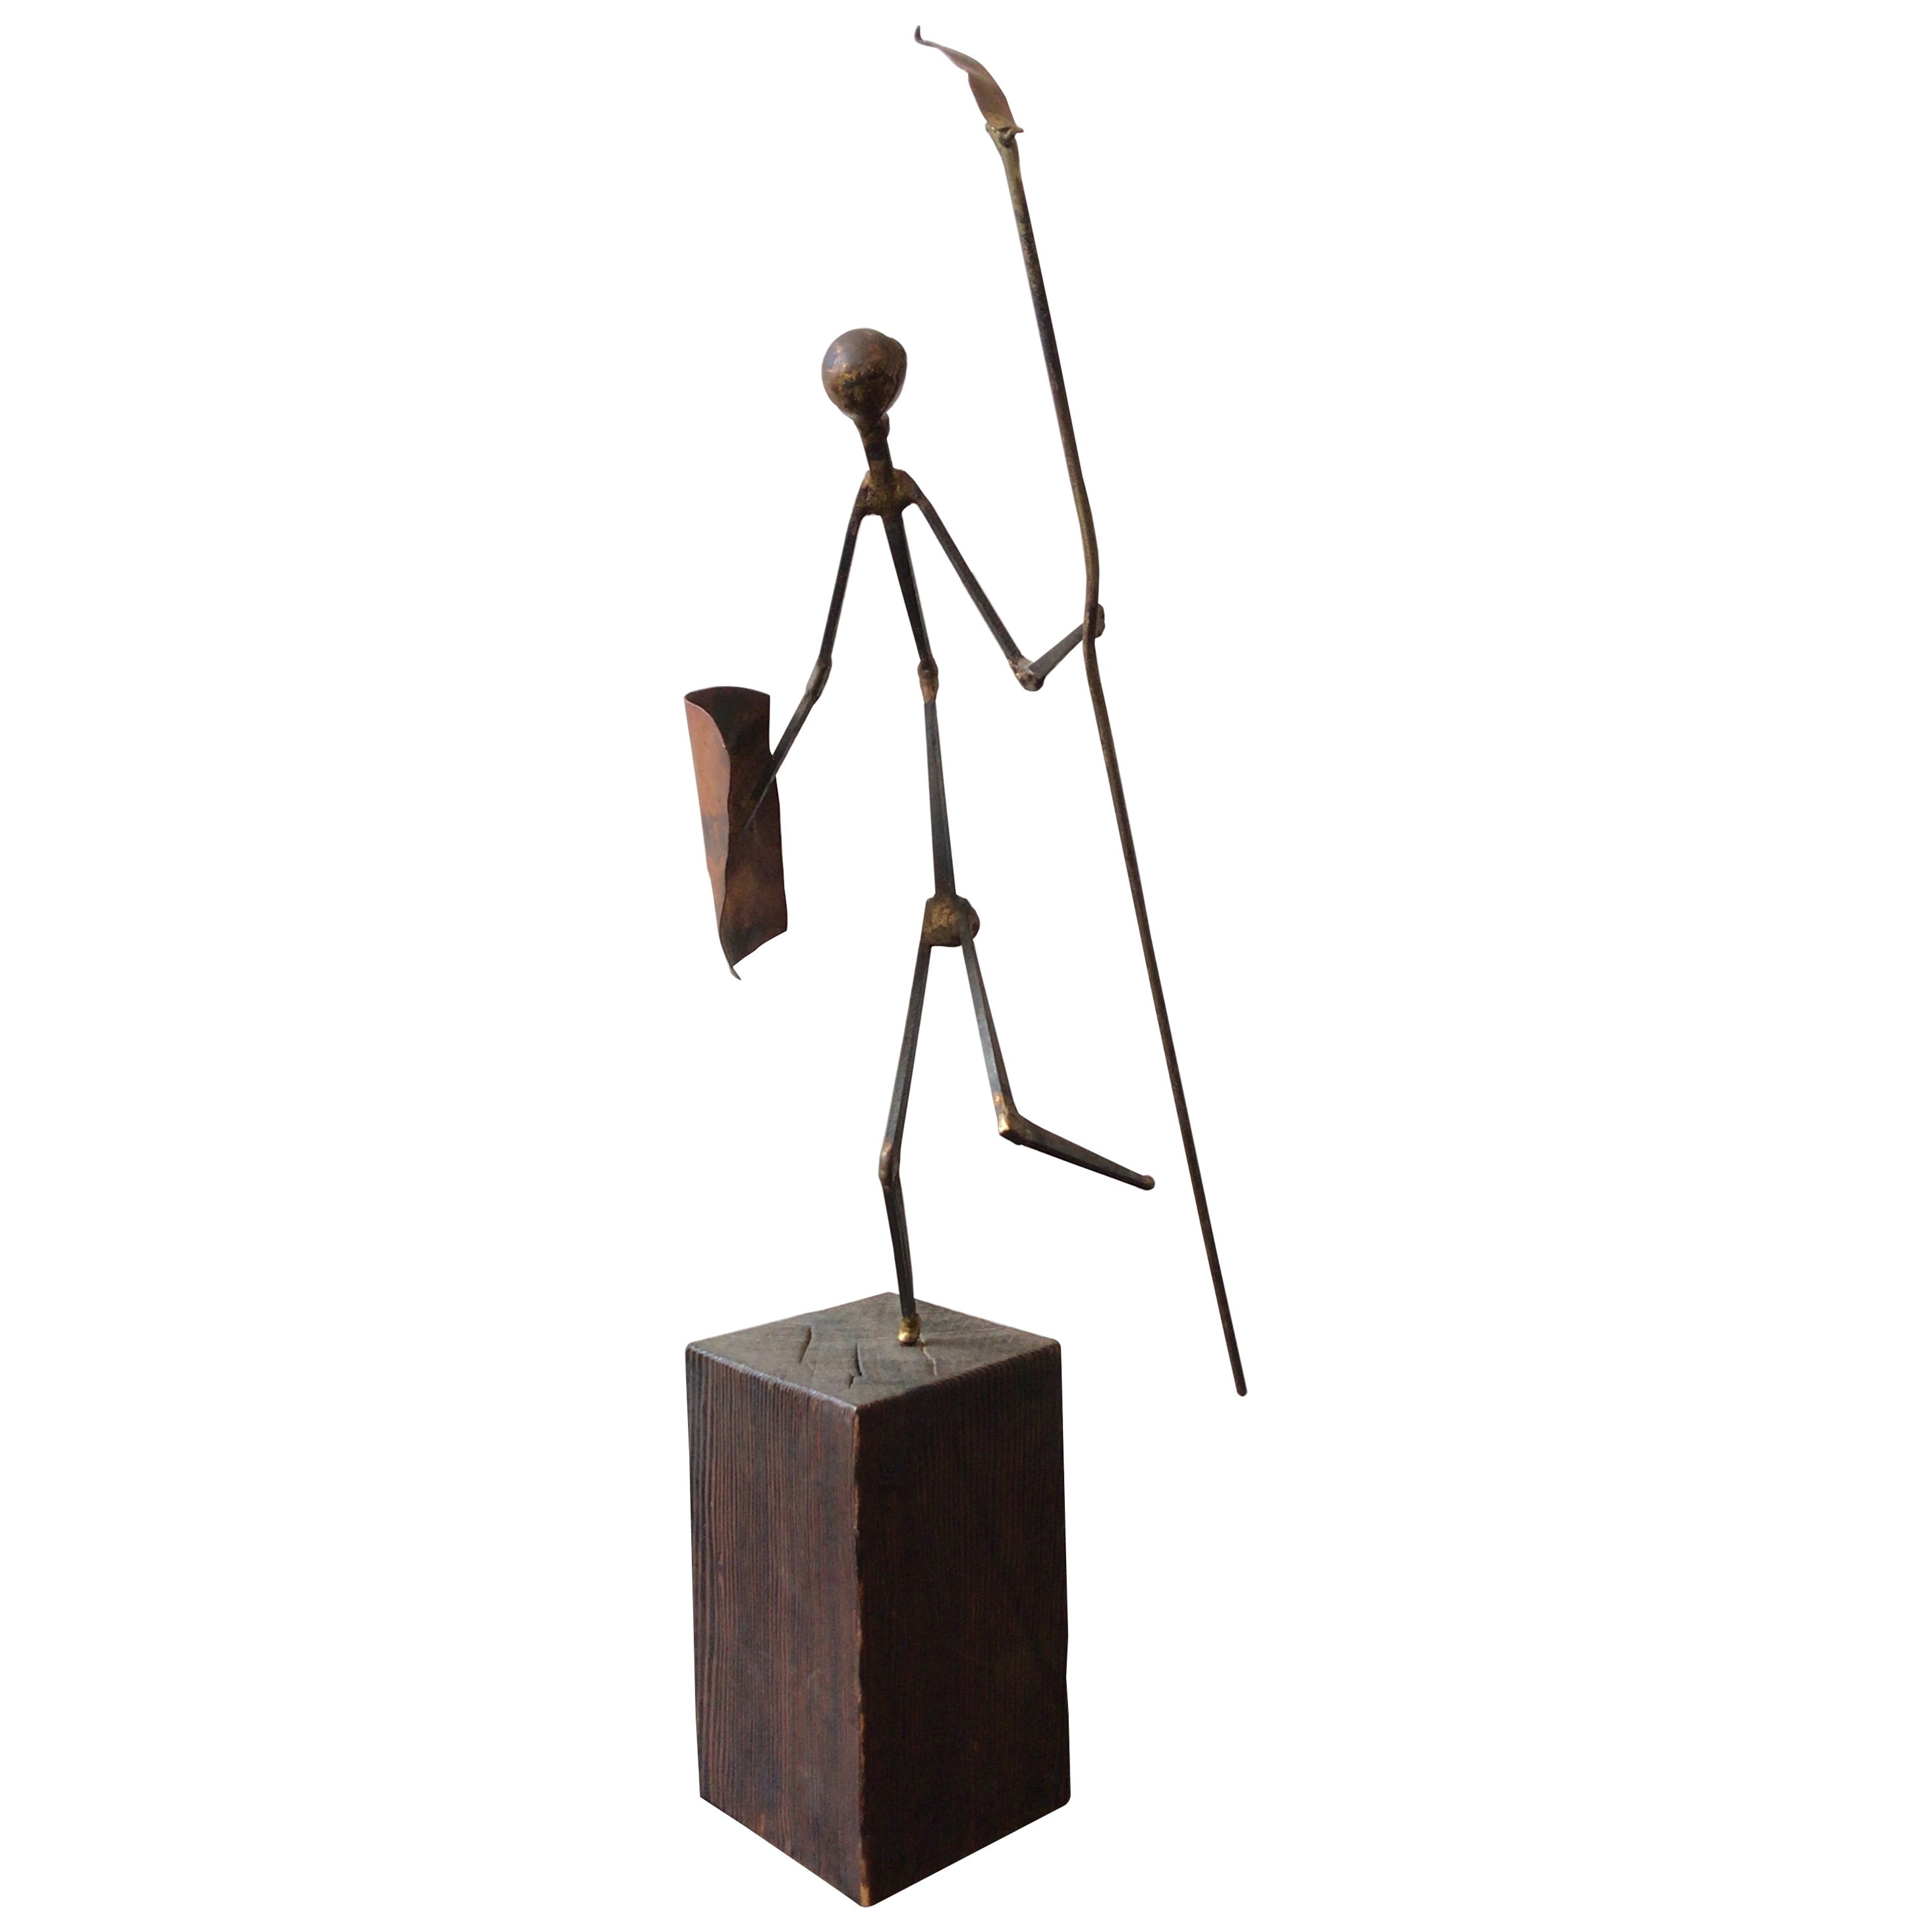 1970s Iron Warrior Sculpture By Alex Kovacs For Sale